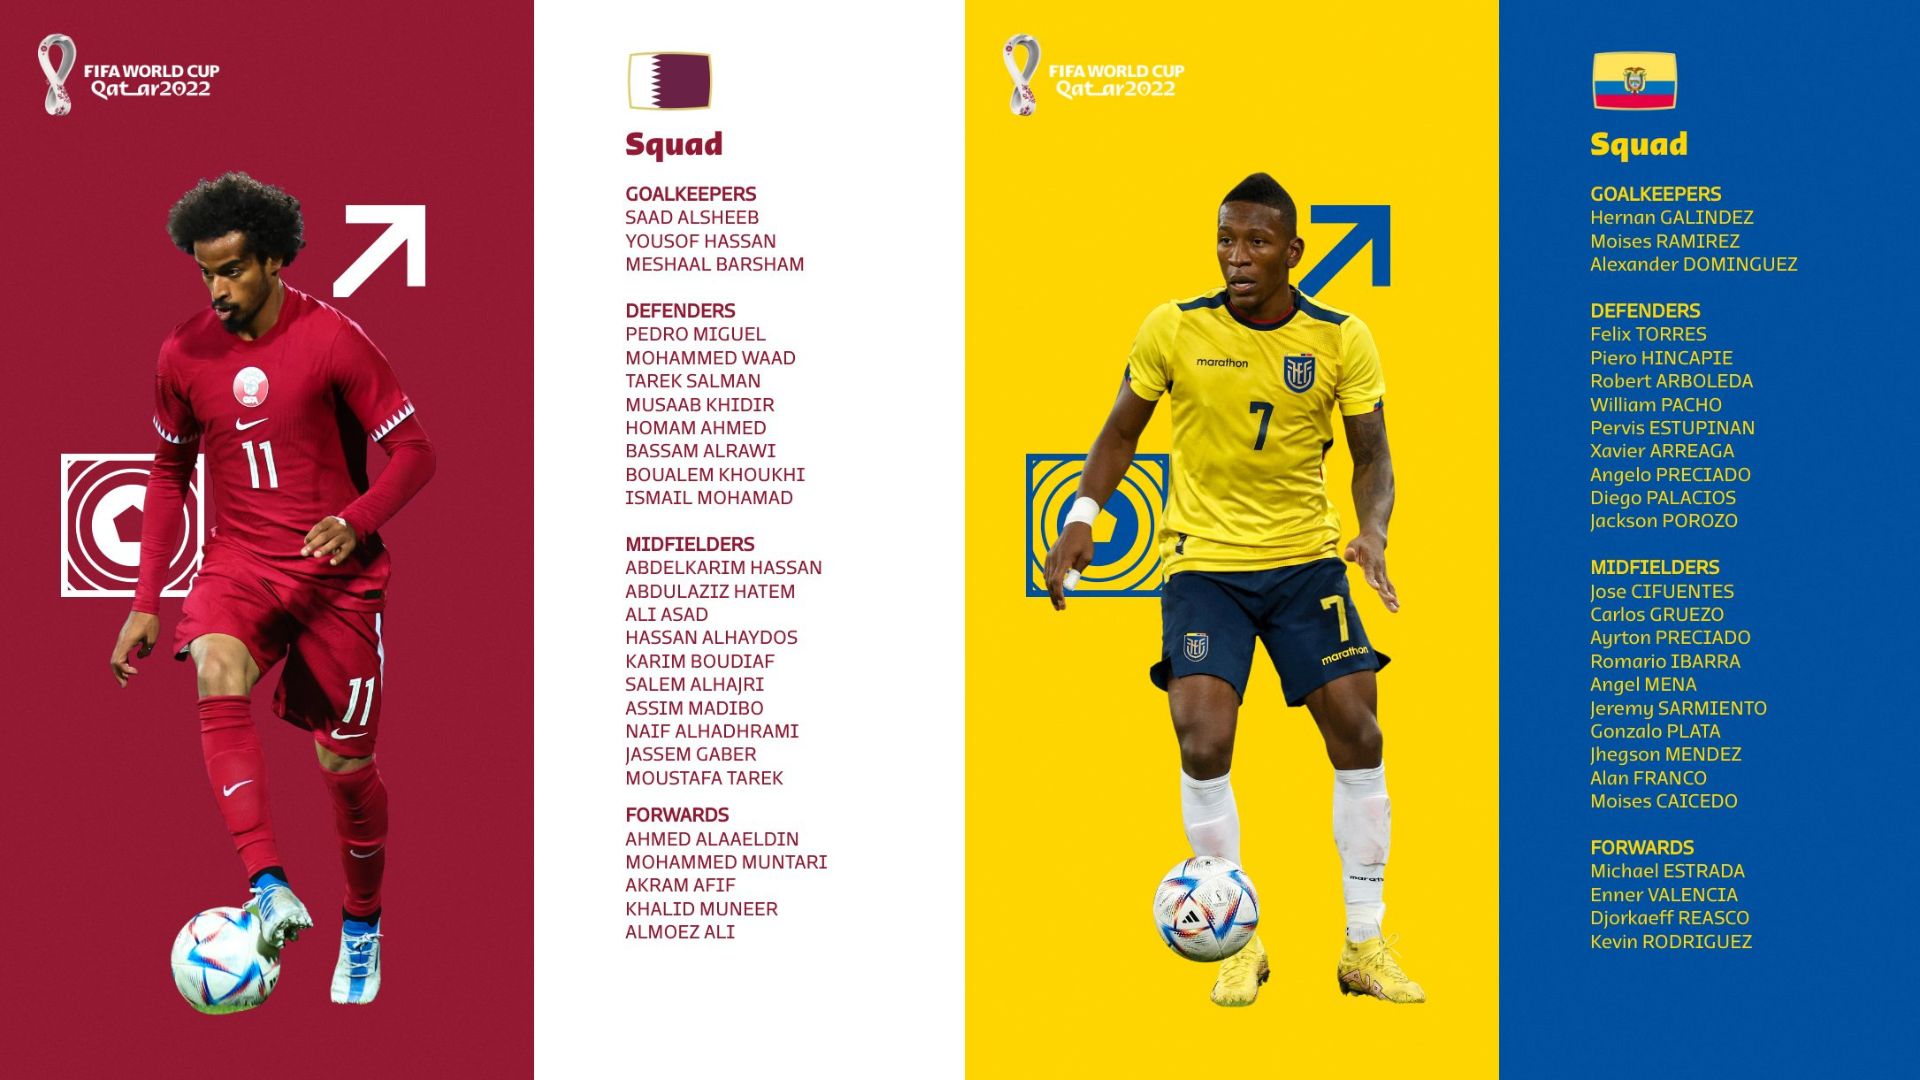 These are the players called up from Ecuador and Qatar for the 2022 World Cup.